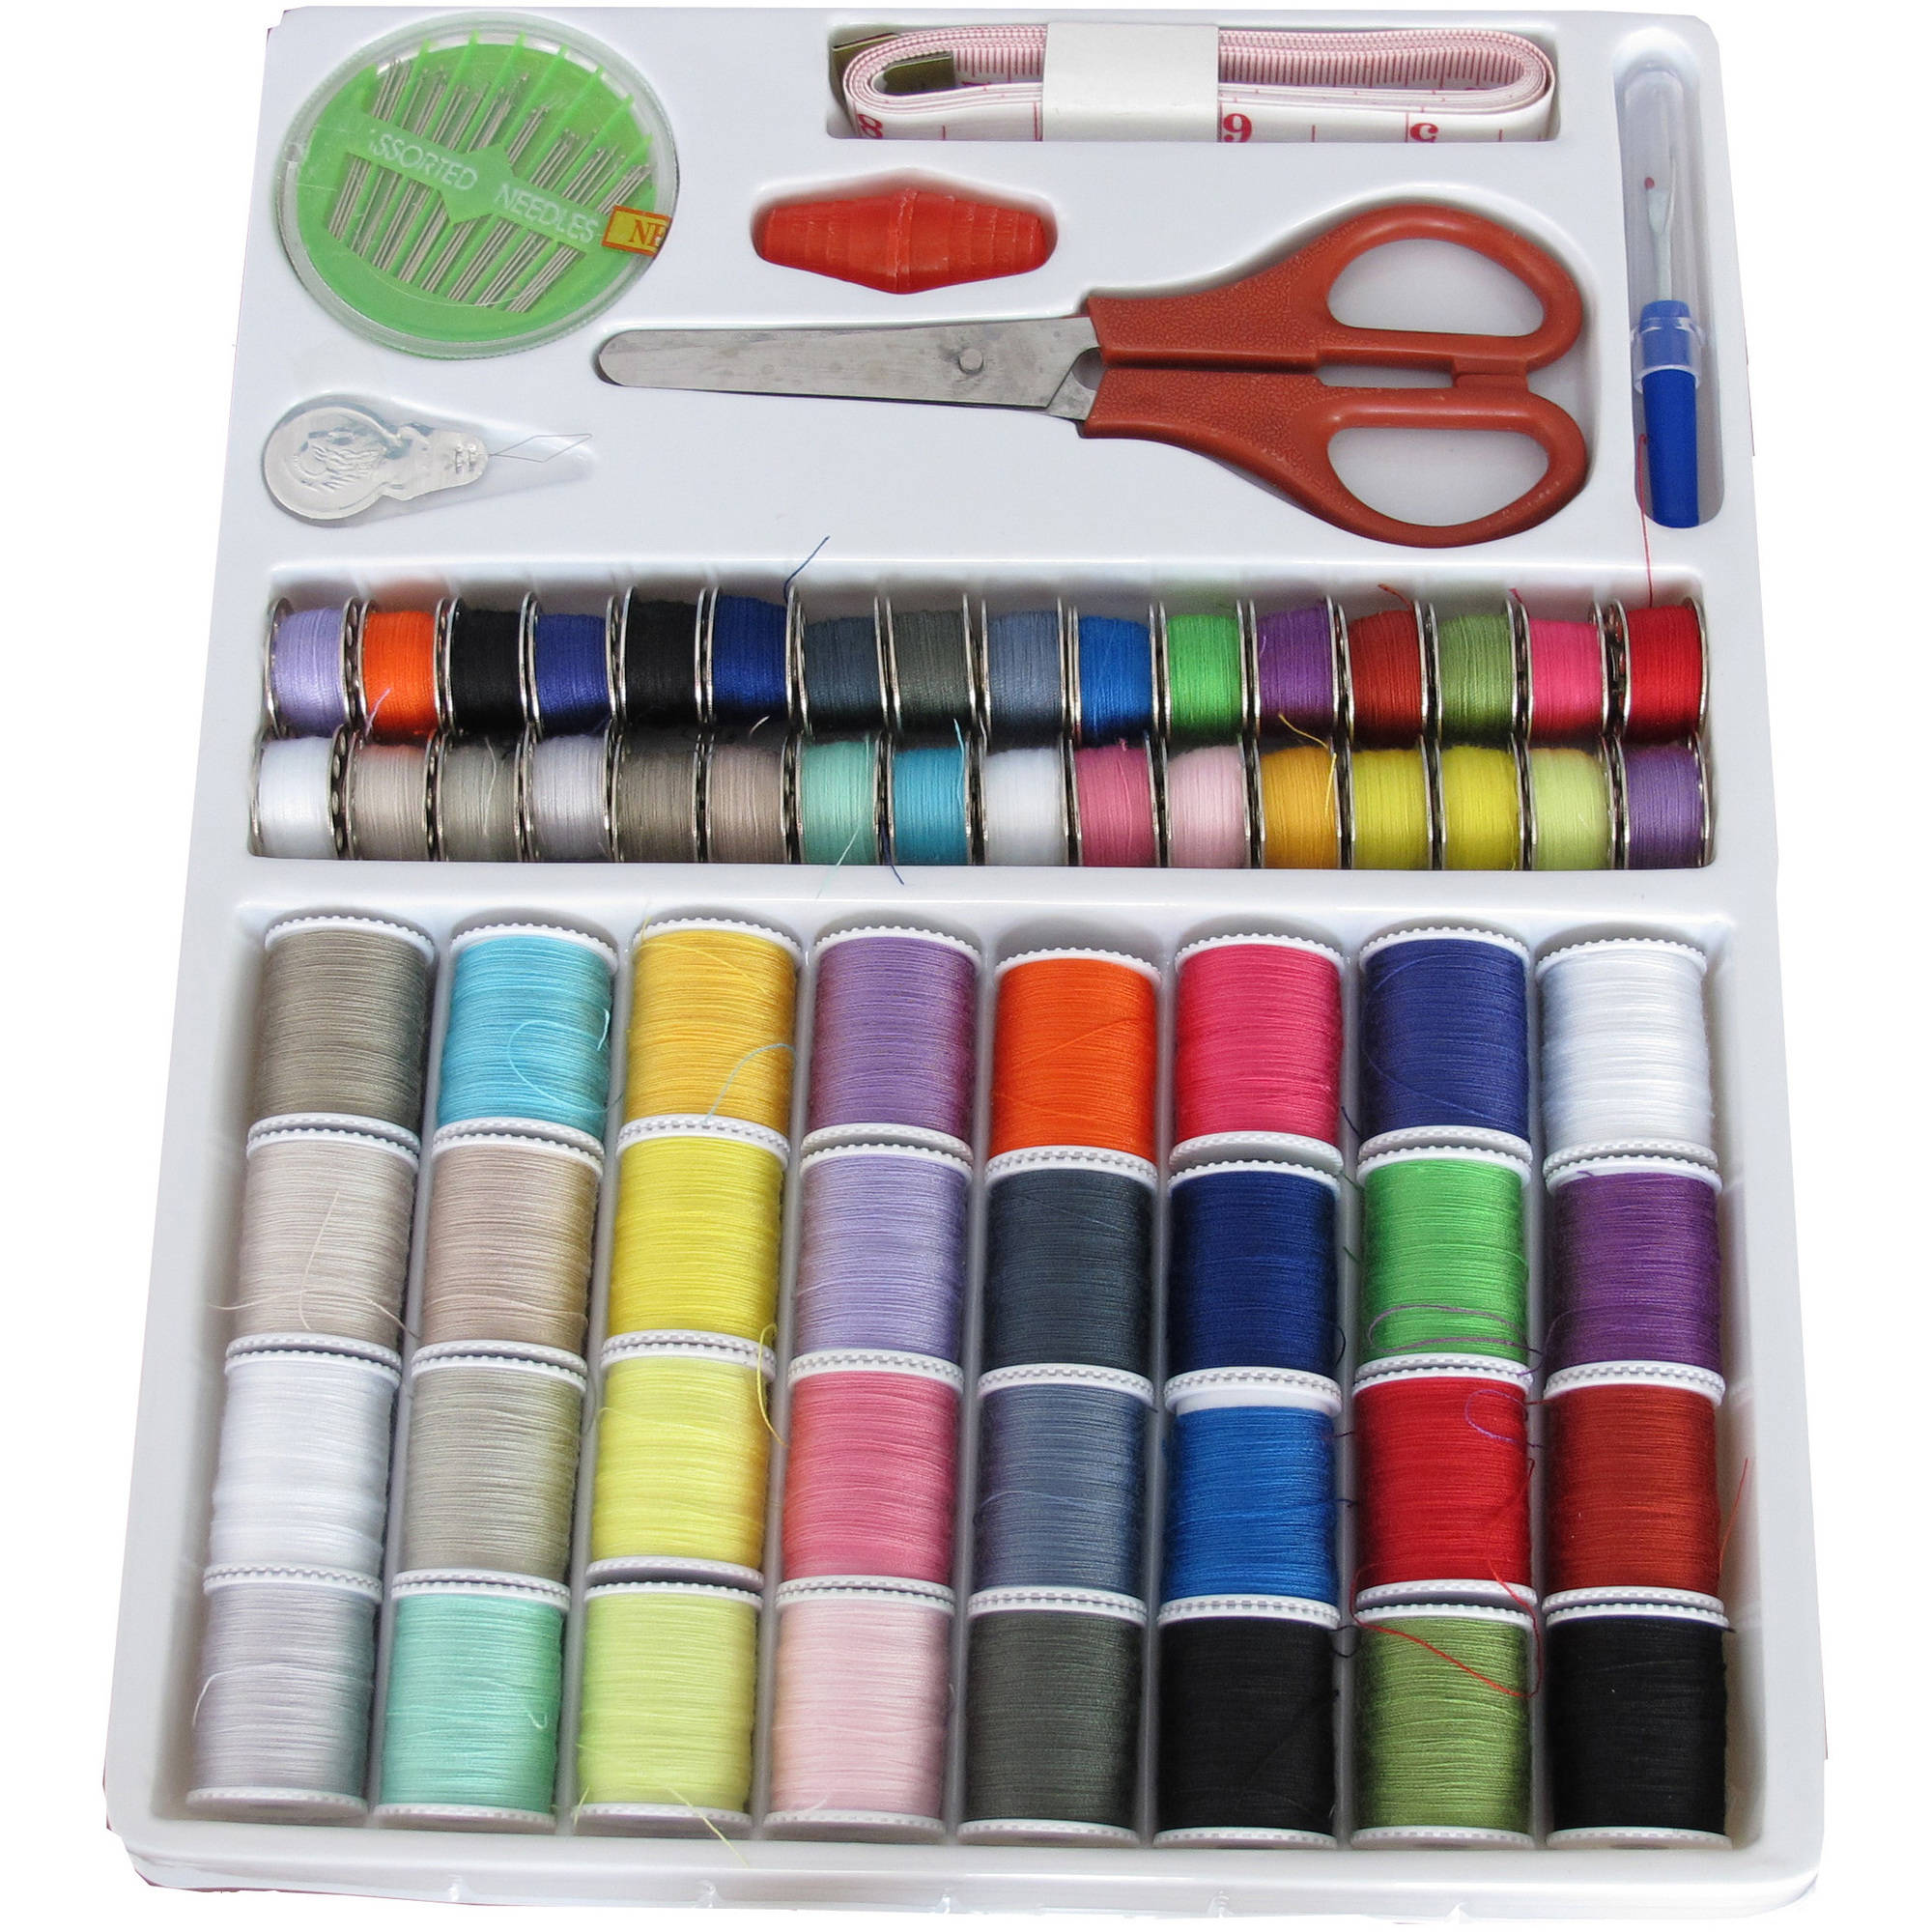 Michley Fs-092 Sewing Kit With 100 Pieces Including Thread Spools, Bobbins, Scissors, Needles, Thimbles, And More - image 1 of 5